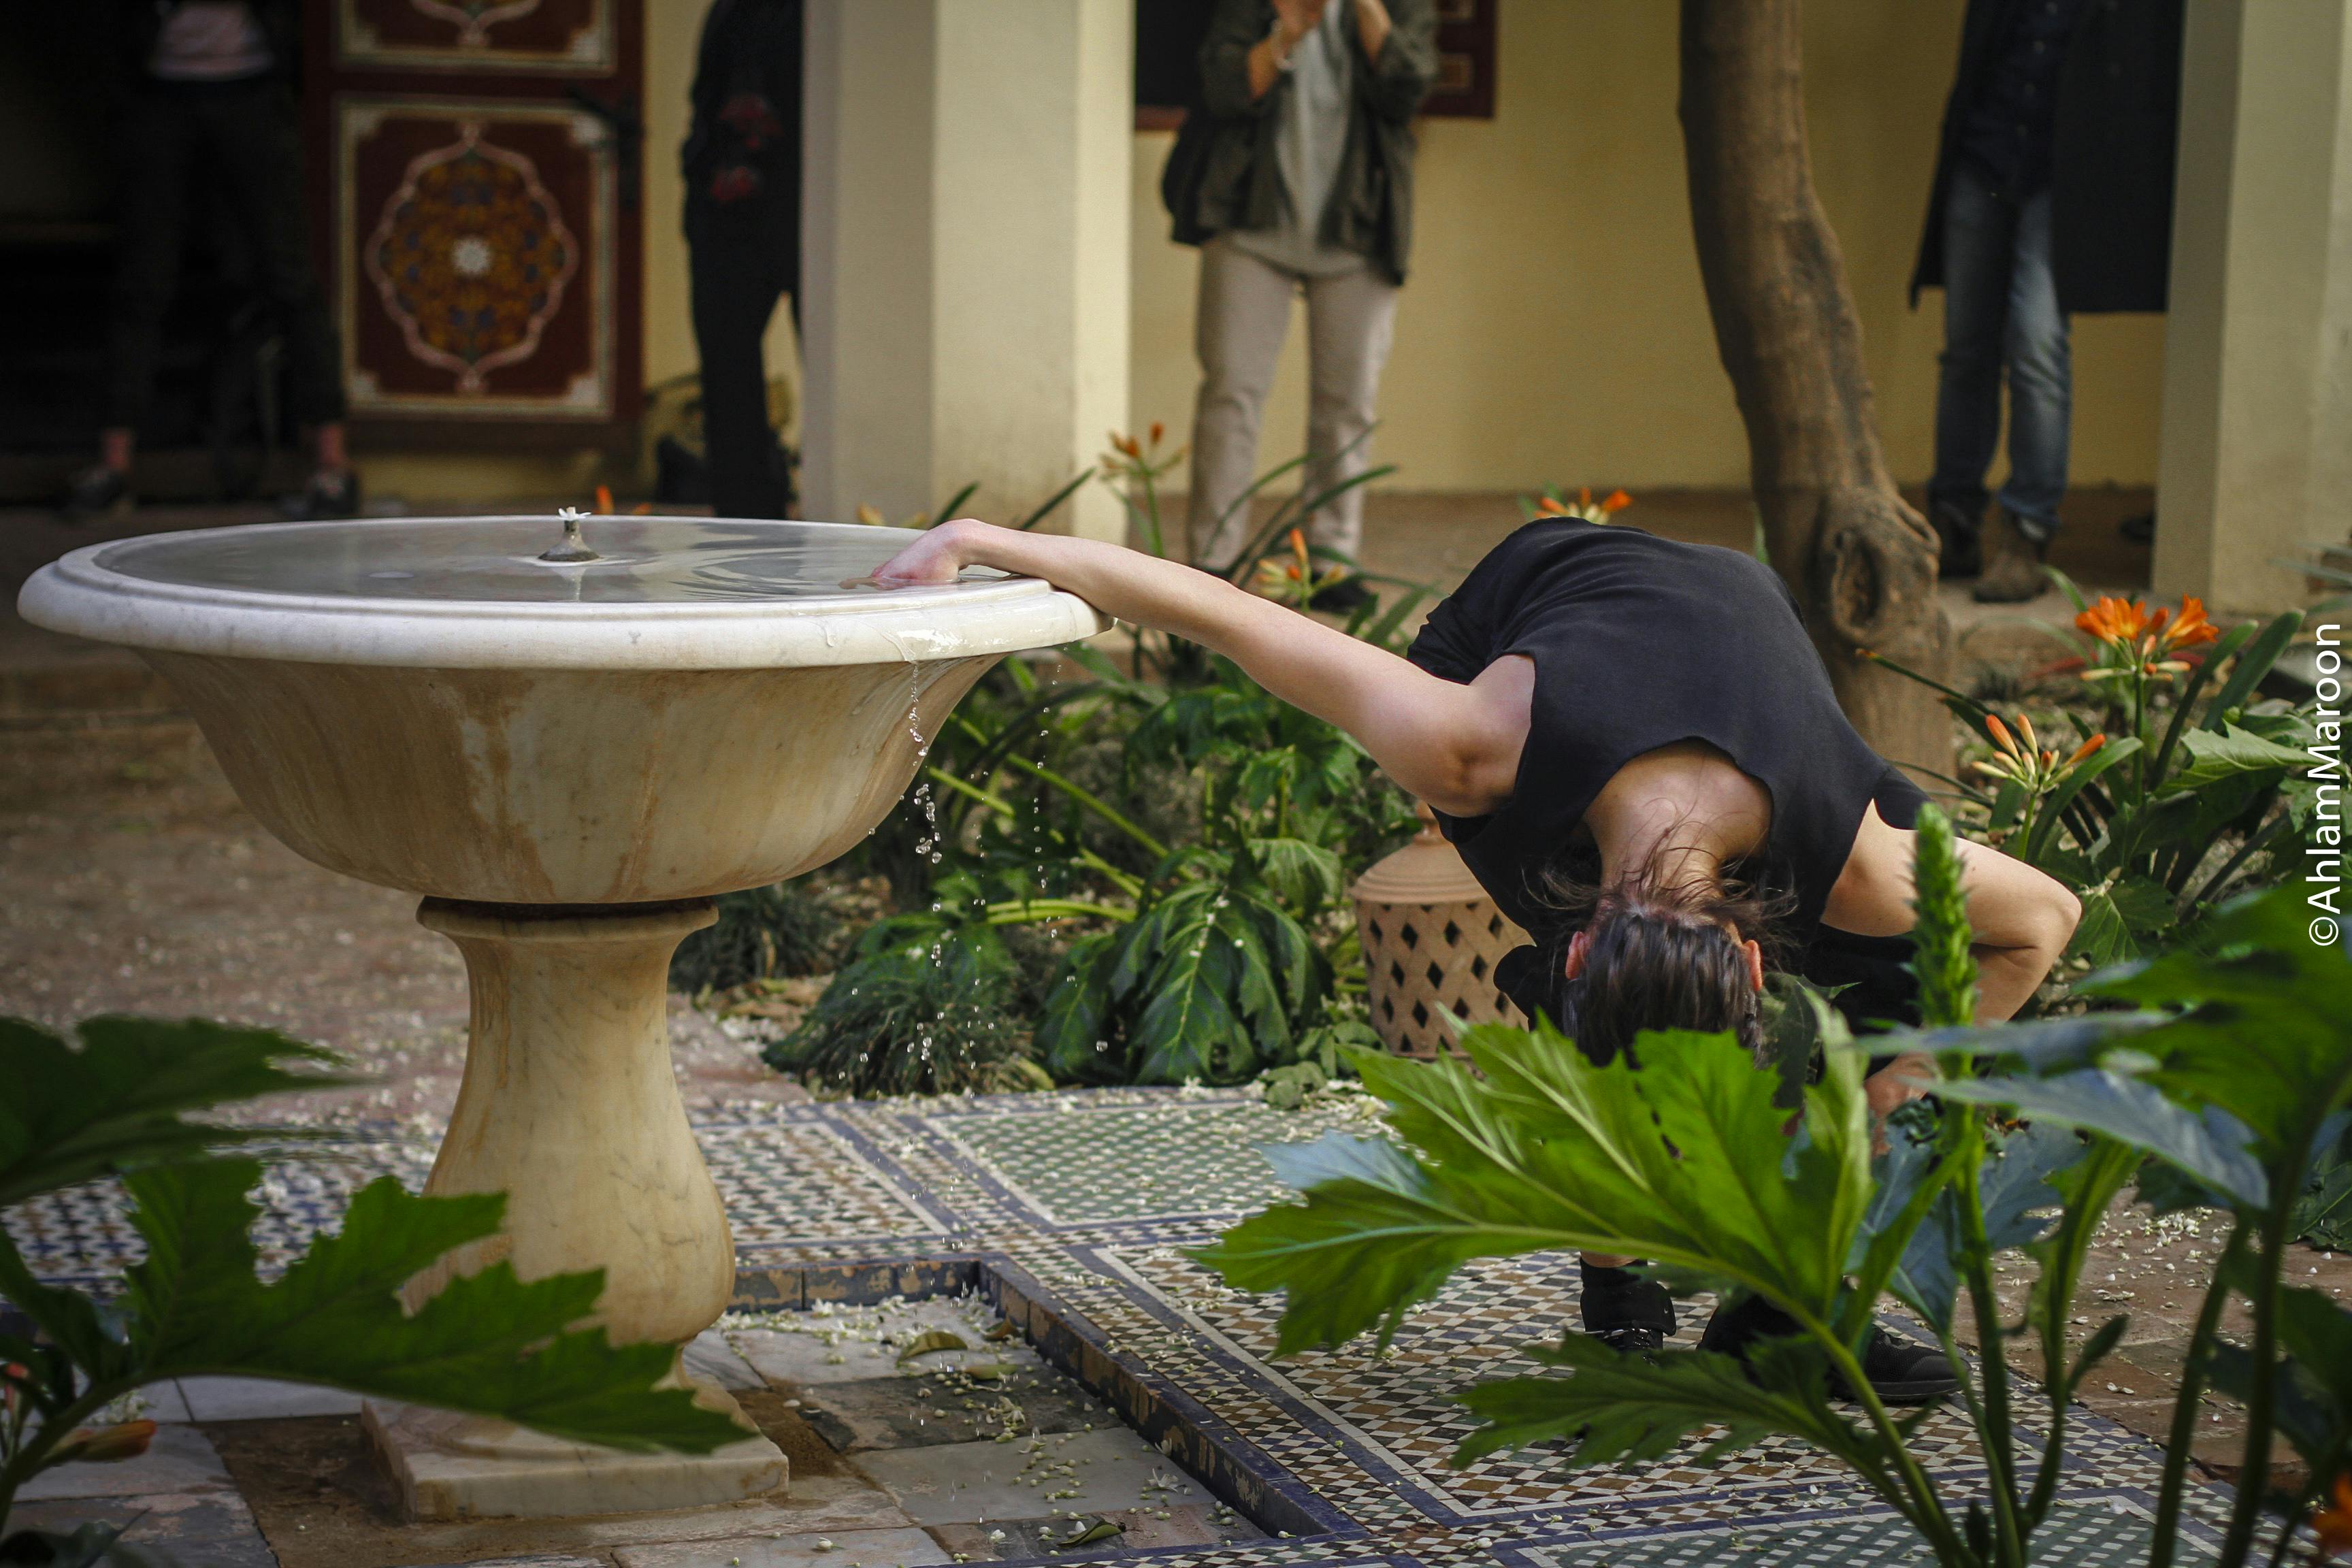 Annamaria Ajmone in an interior courtyard, surrounded by short plants with large leaves and orange flowers. She has one hand inside a fountain while bending with the rest of her body forward, almost to the ground. Behind her, under the colonnade, stands the audience.